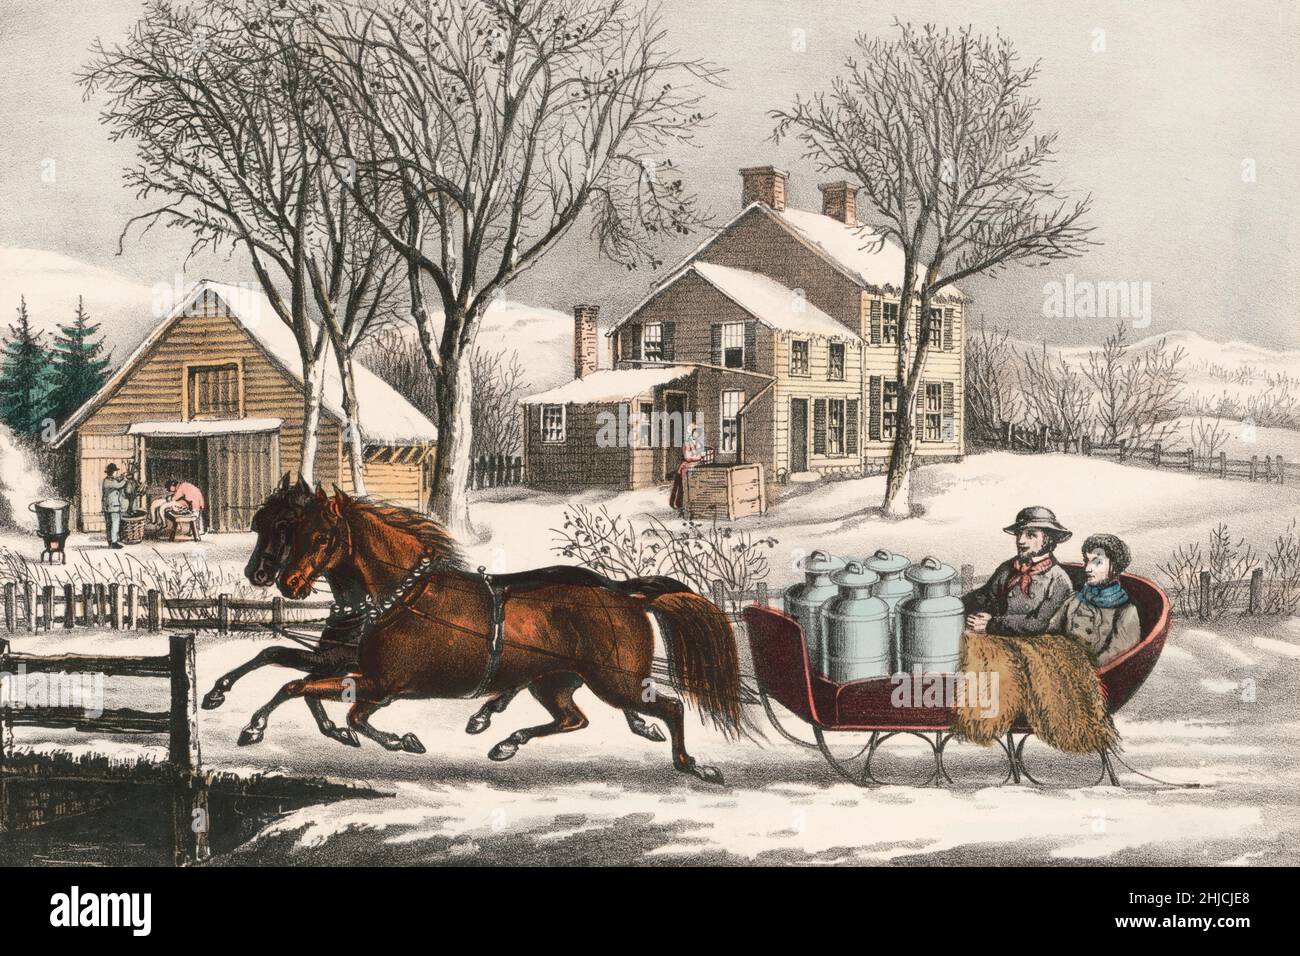 Snowy American winter morning in the country. The print shows two people riding in a horse-drawn sleigh with four milk cans. Hand-colored lithograph, Currier and Ives, 1873. Stock Photo